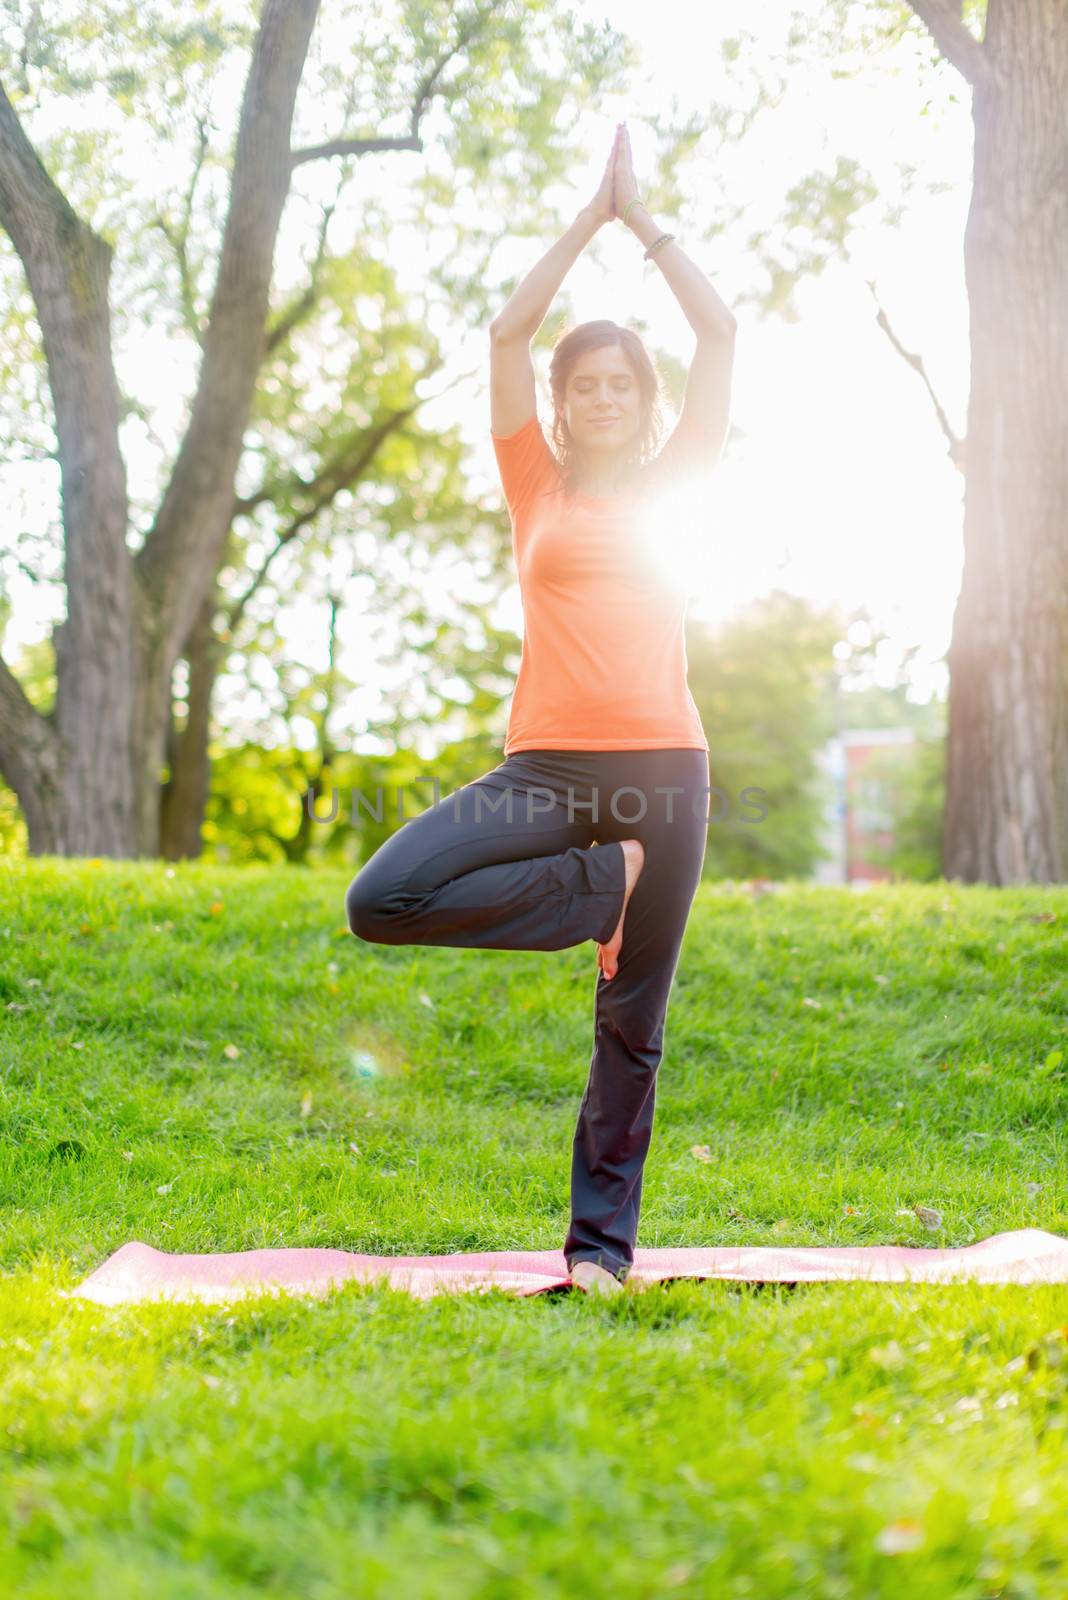 Portrait of a girl meditation and taking yoga poses at sunset under trees